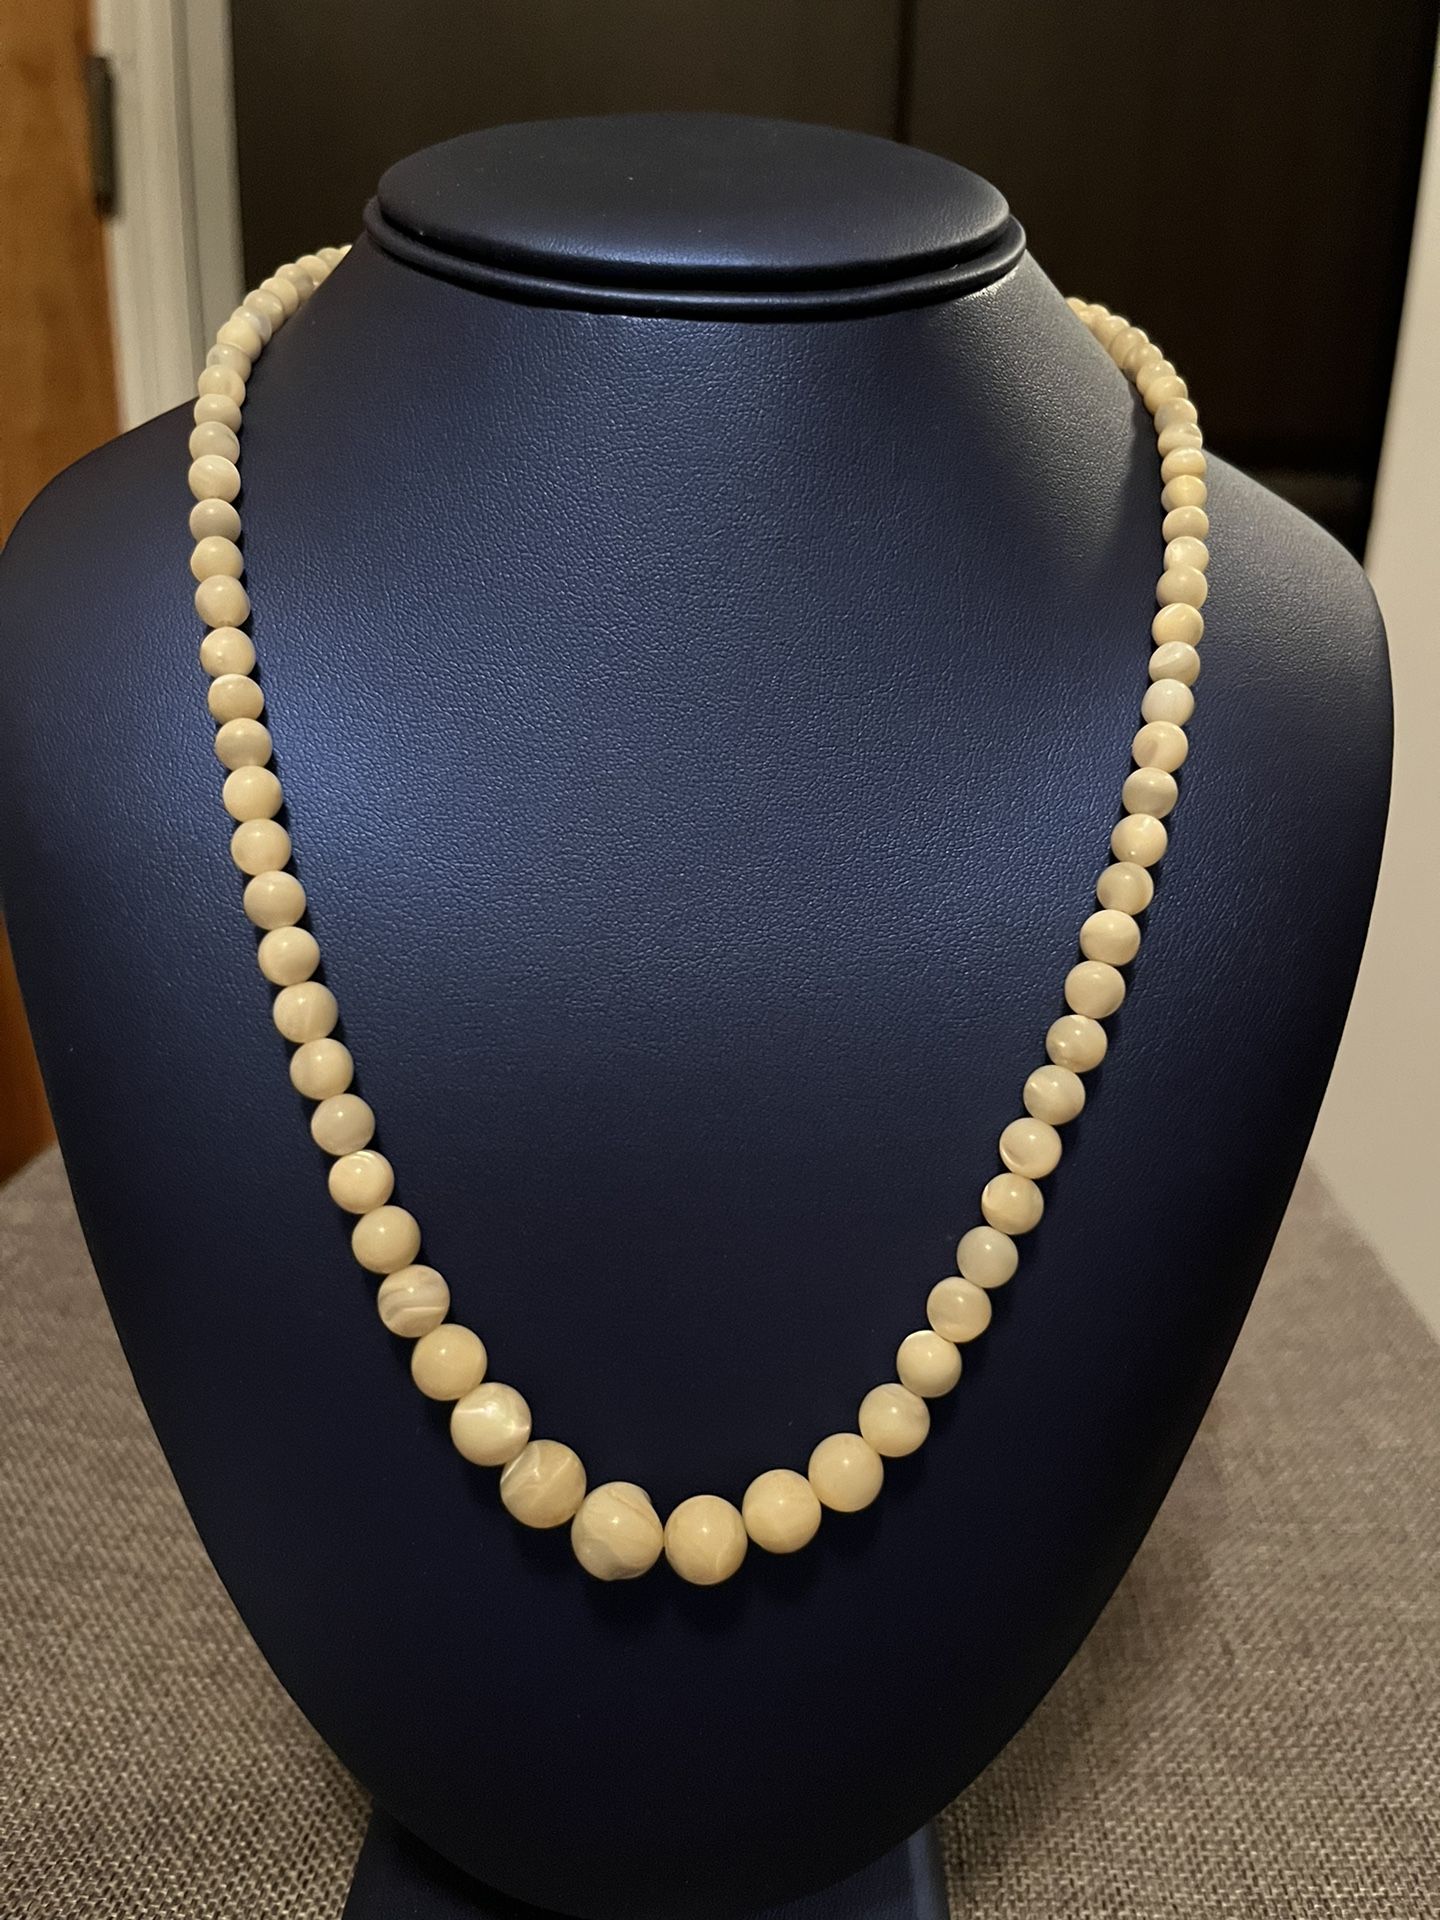 Shell beaded Pearl necklace. Very pretty. From clasp to clasp is about 20”.(salt water pearl). In good condition 